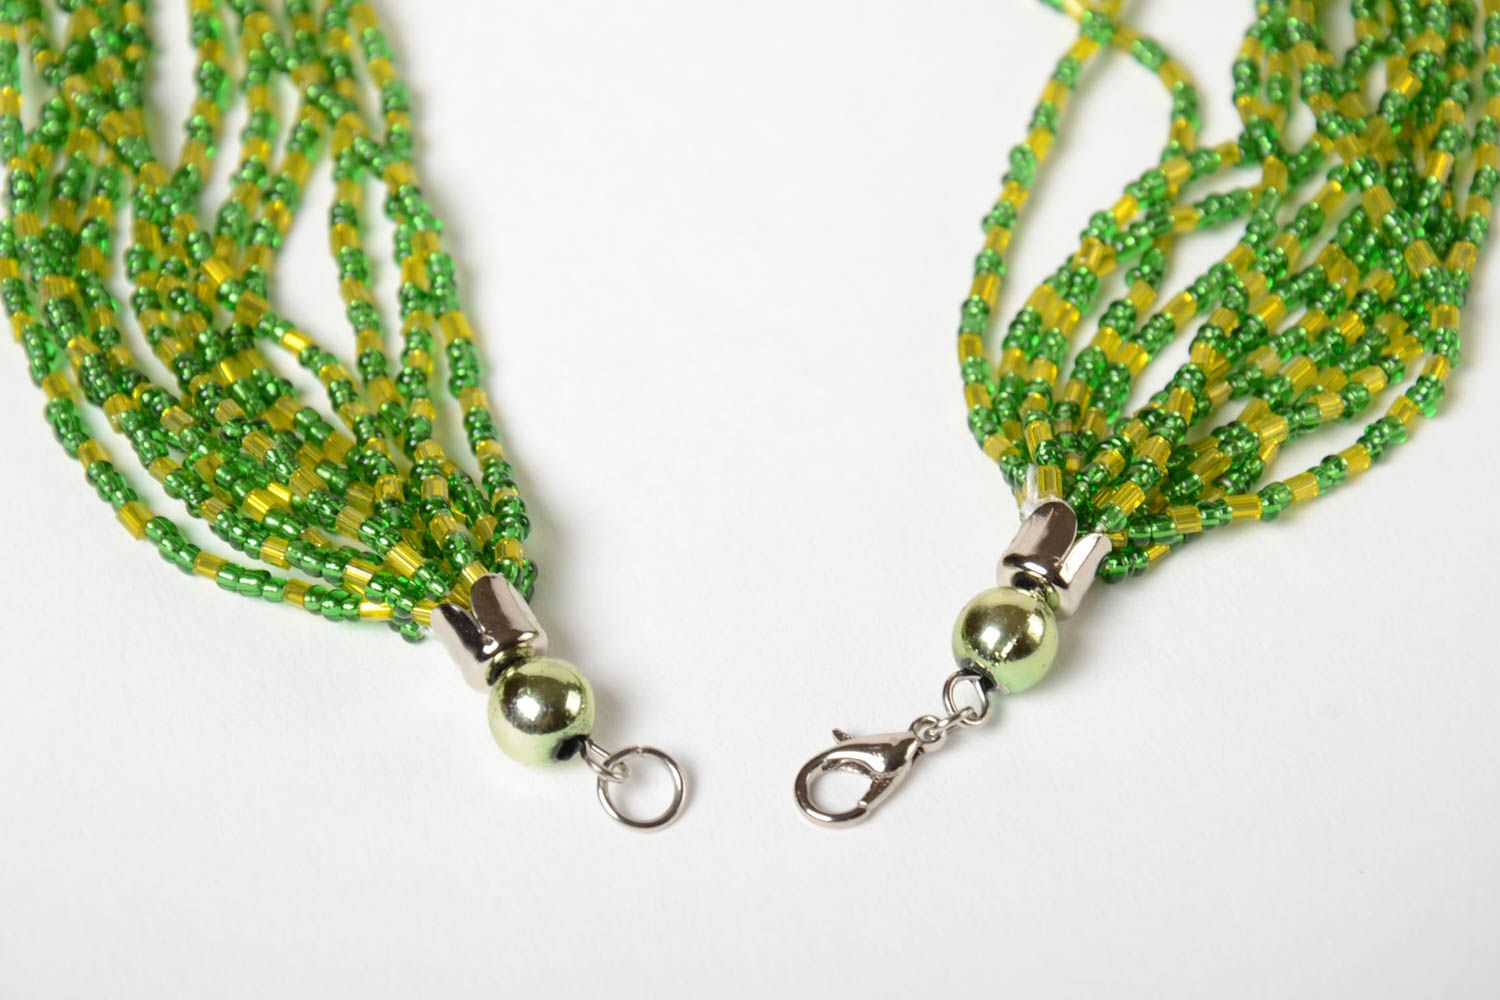 Unusual homemade beaded necklace evening necklace designs fashion accessories photo 4